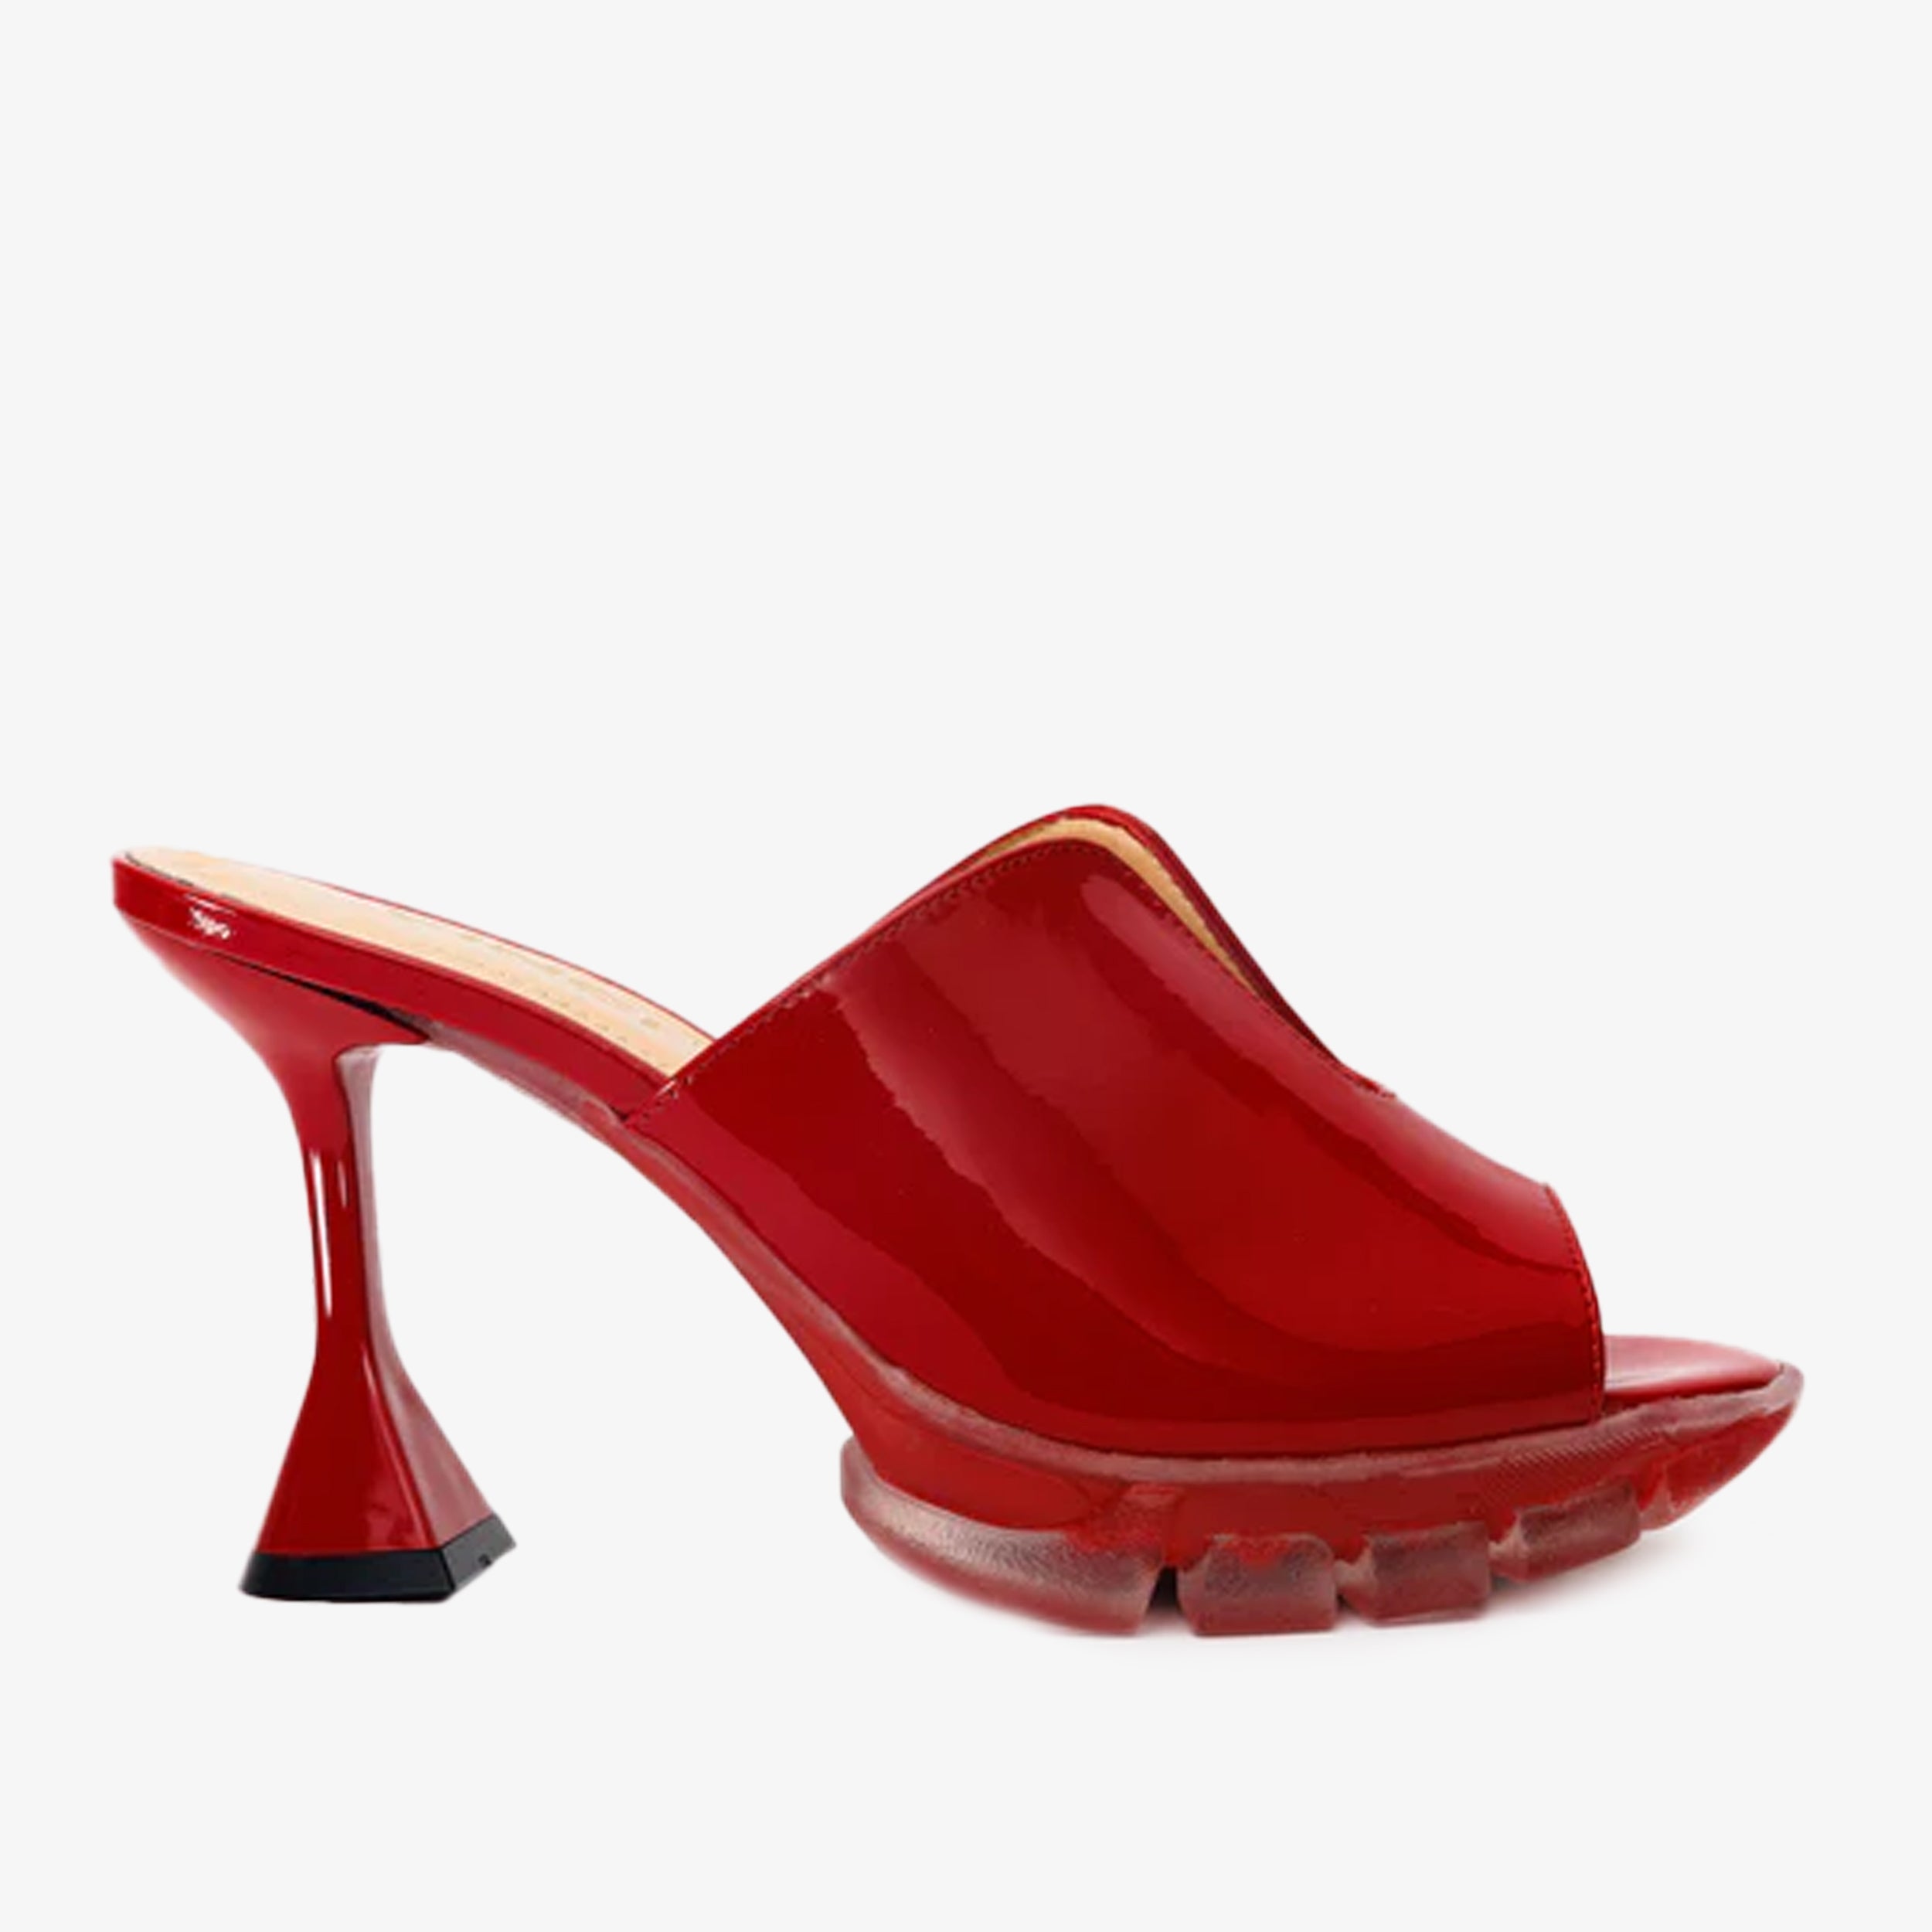 The Caratal Red Patent Leather Women Sandal